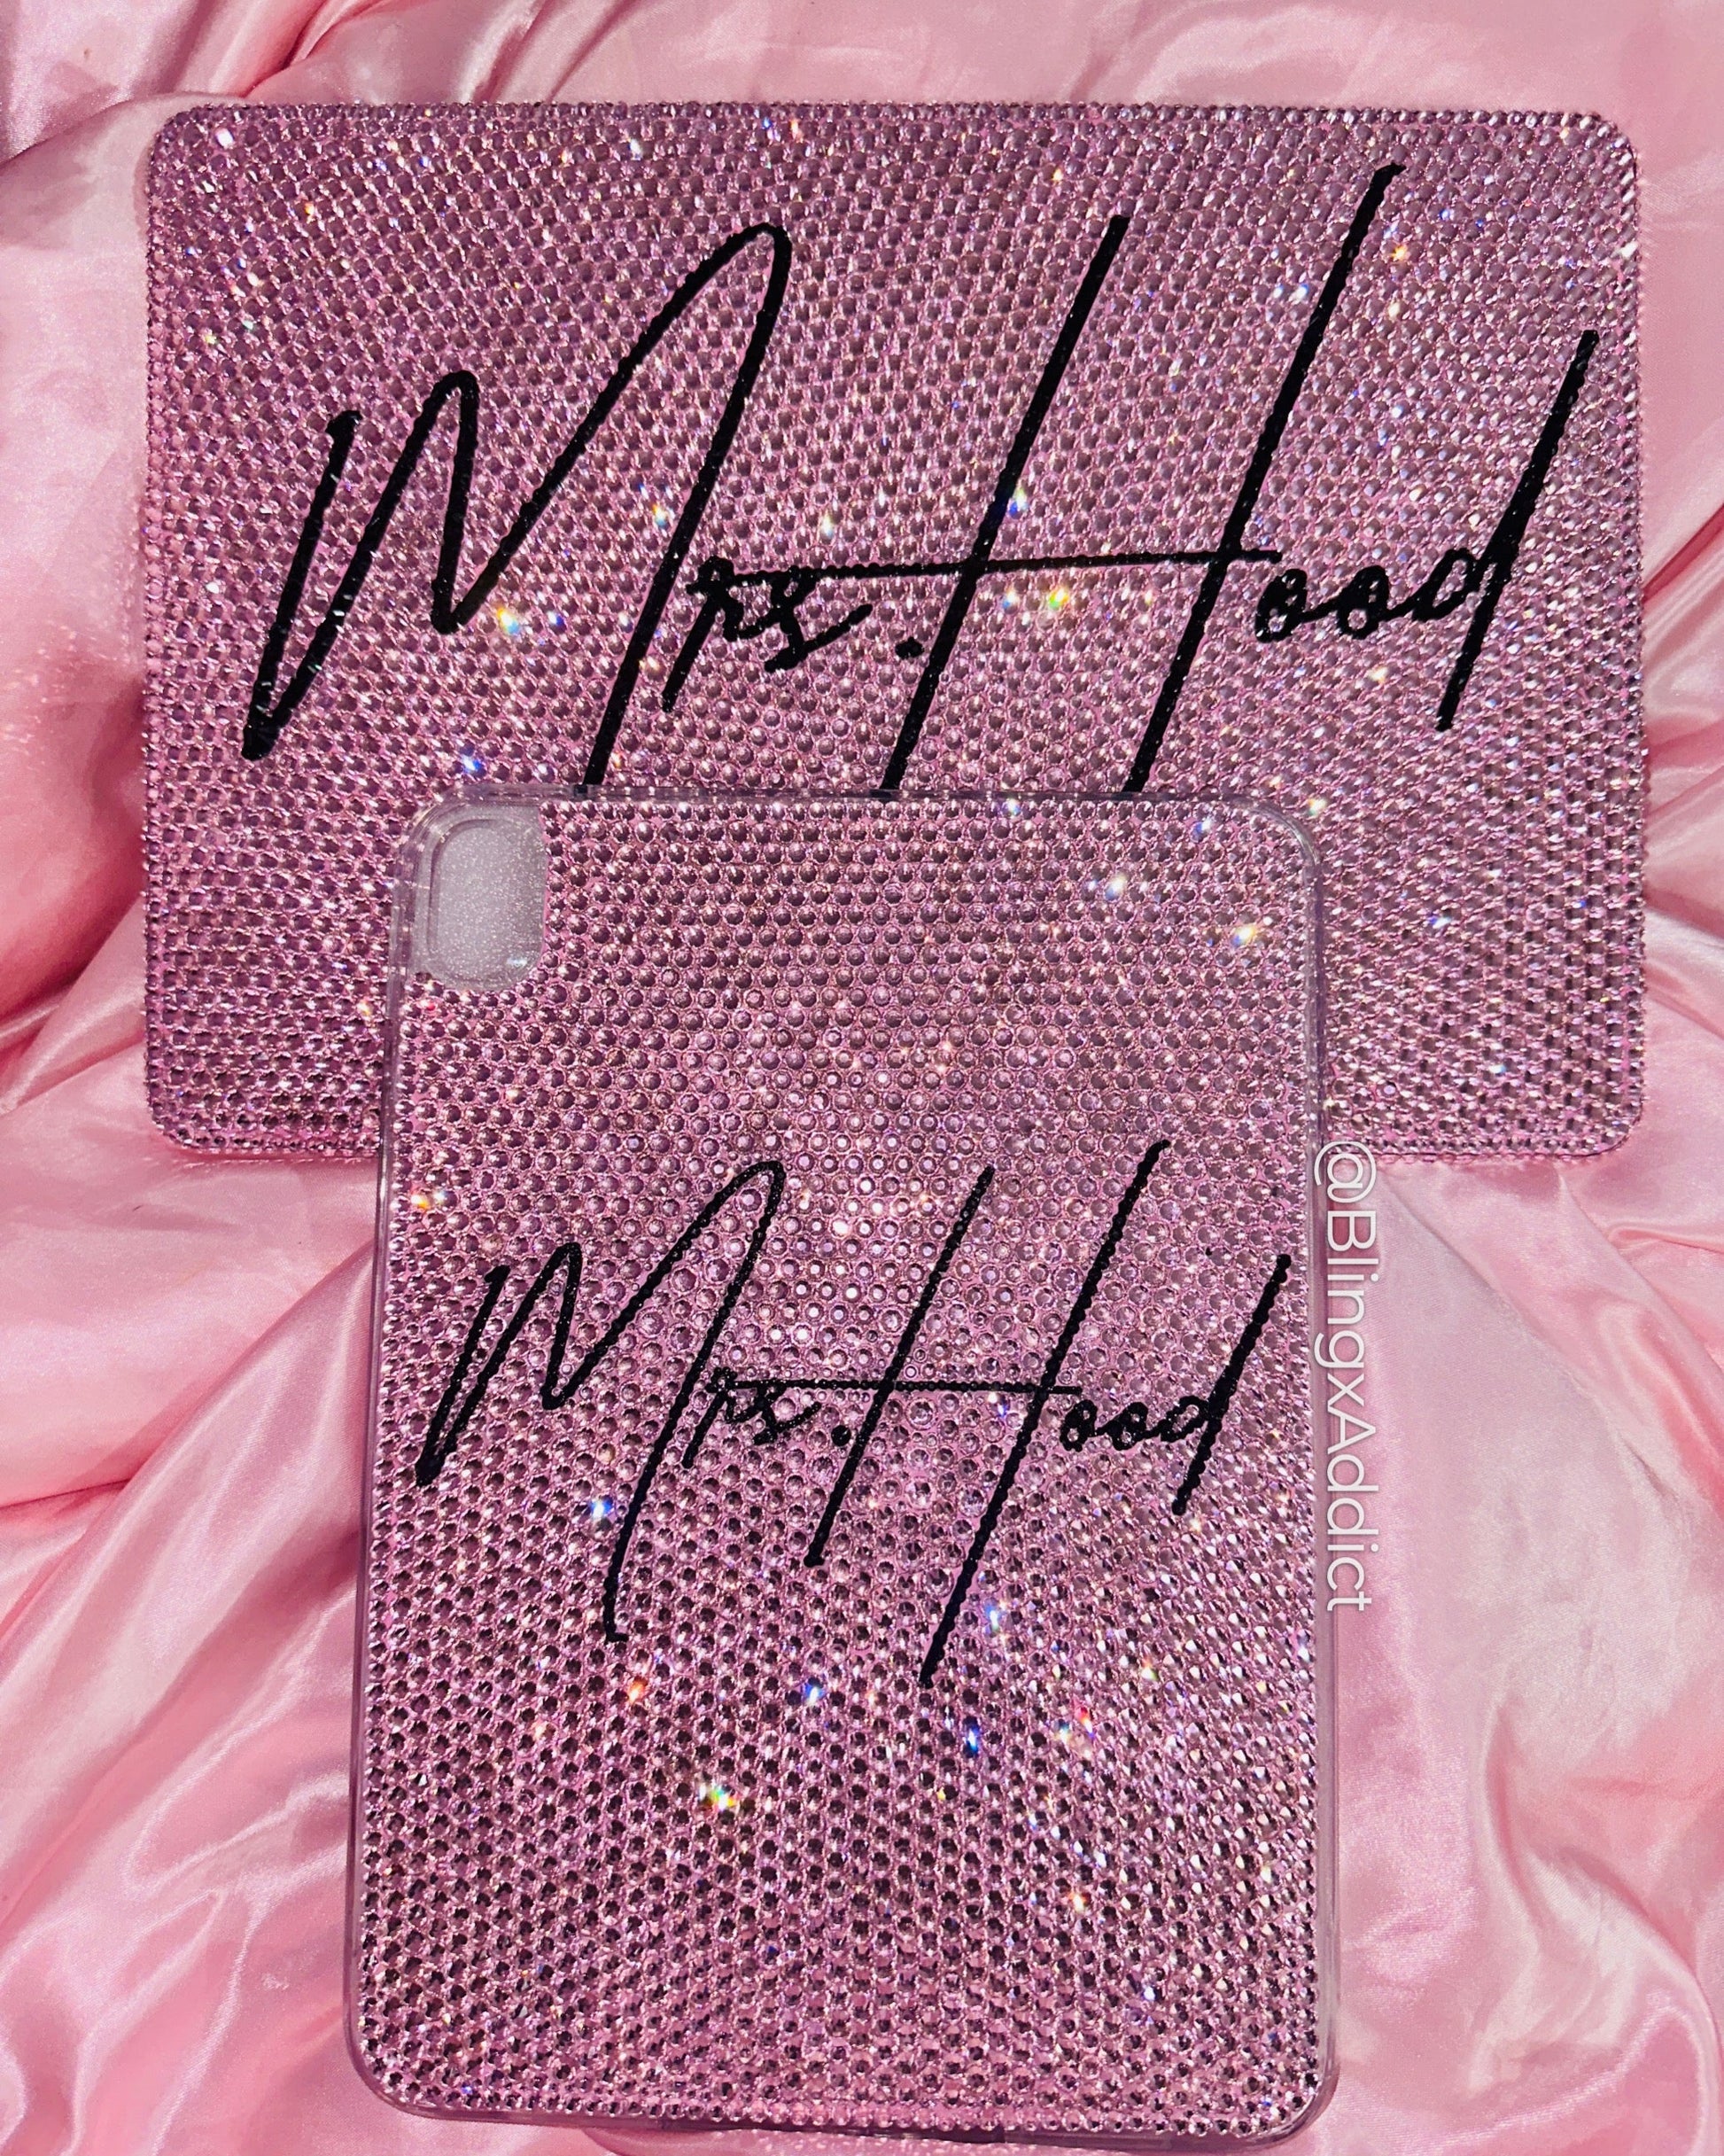 BUNDLE: Matching iPad & MacBook Crystal Cases |Personalized Bedazzled Rhinestone Covers for Gifts, Birthdays, Holidays, Celebrations Cell and Tablet Accessories by BlingxAddict | BlingxAddict